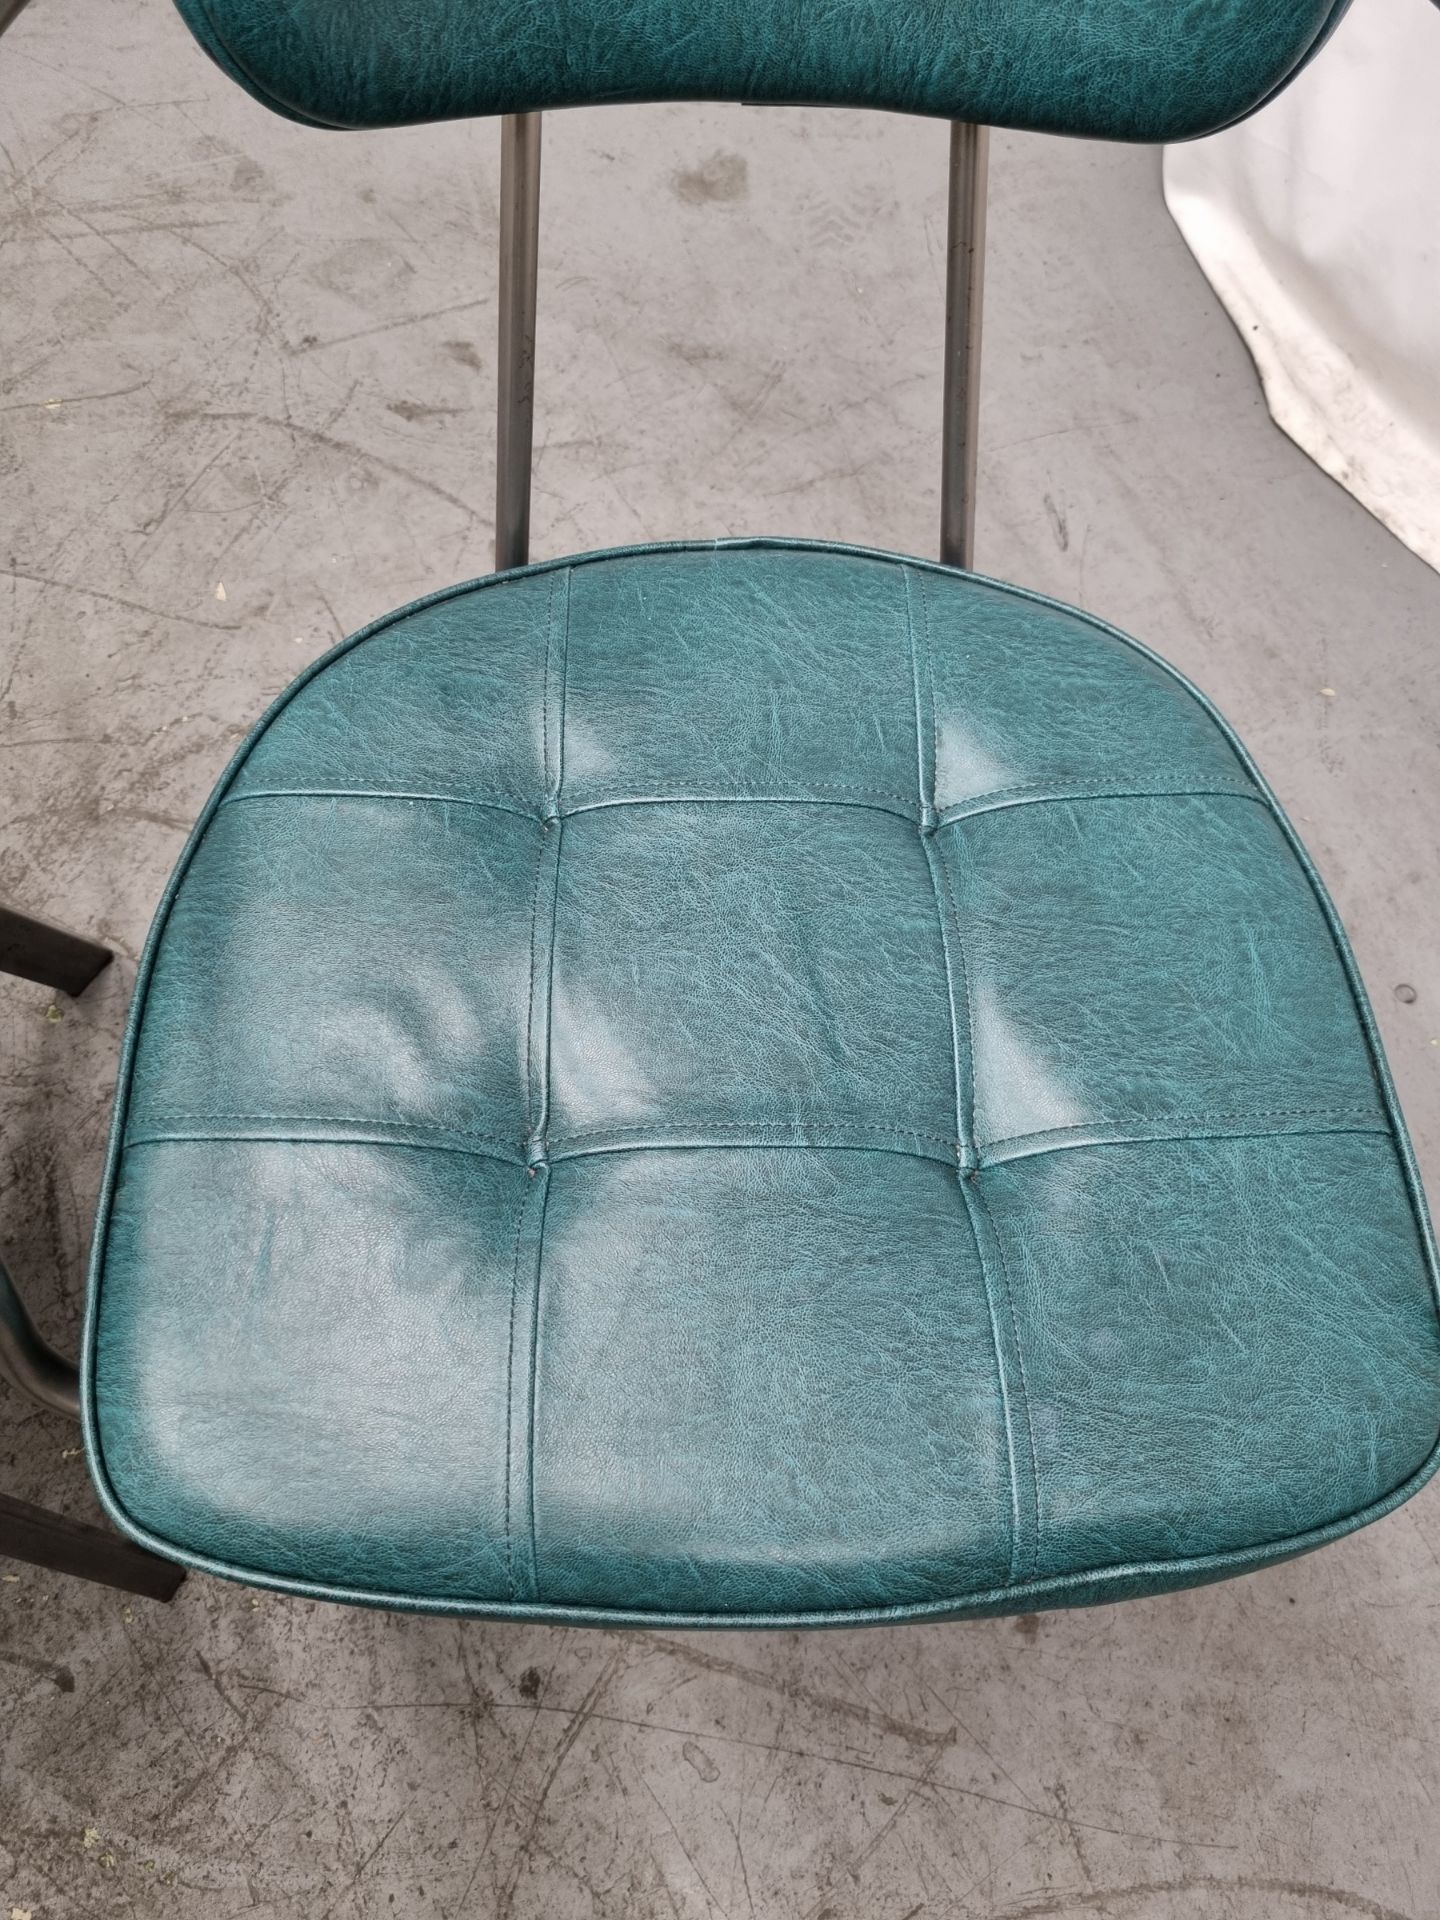 4x Industrial green leather restaurant chairs - L 550 x W 600 x H 80cm - Image 5 of 11